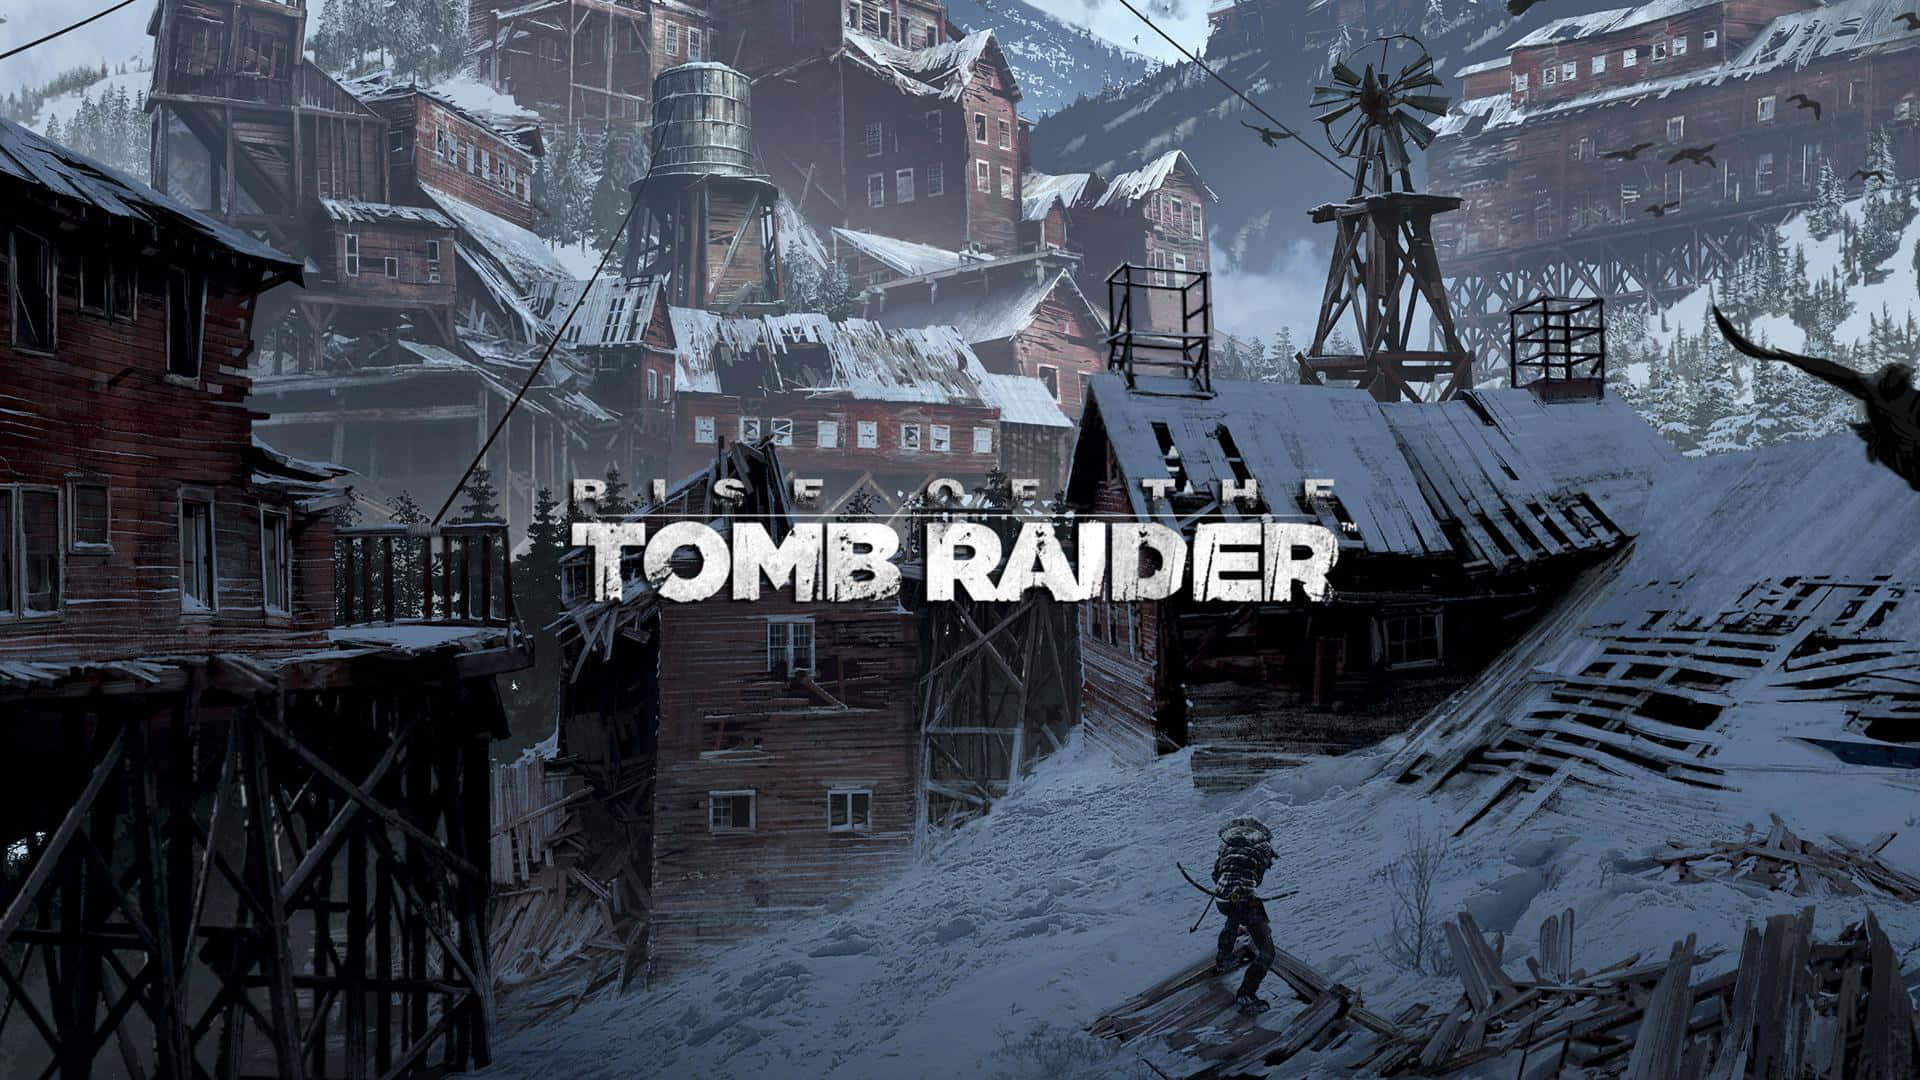 "Master the Art of Adventure in 'Rise of the Tomb Raider'"